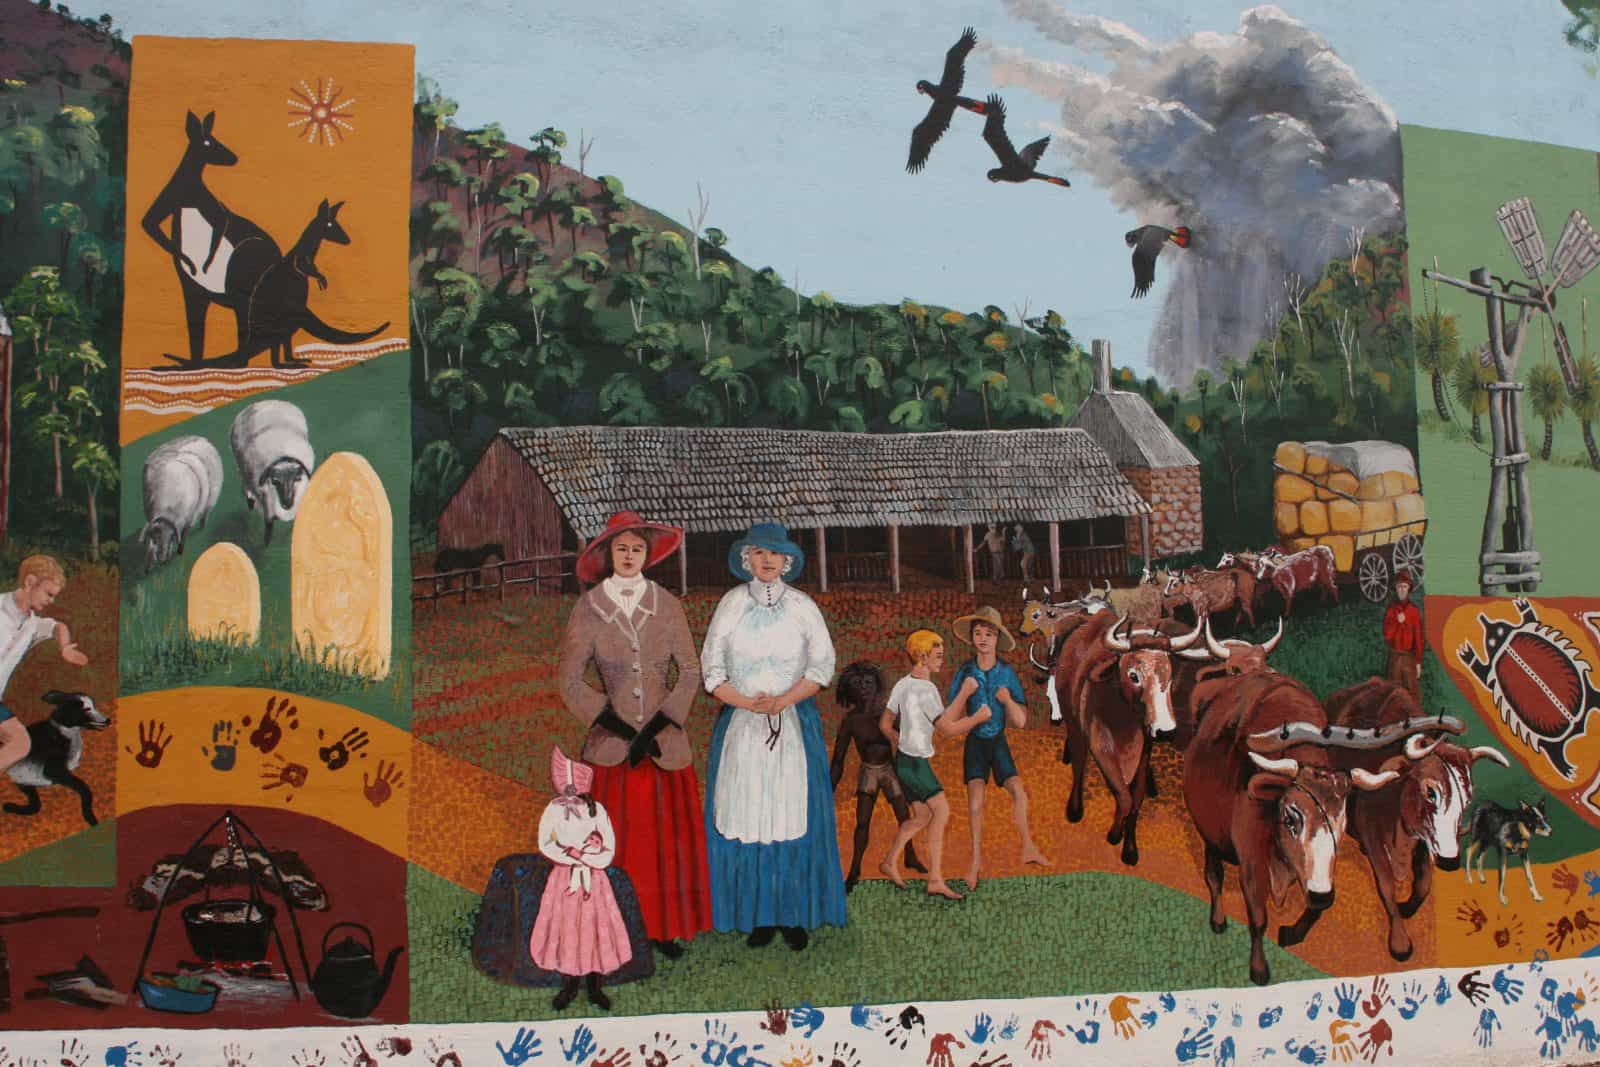 Part of the 'Spirit of the Land' Mural